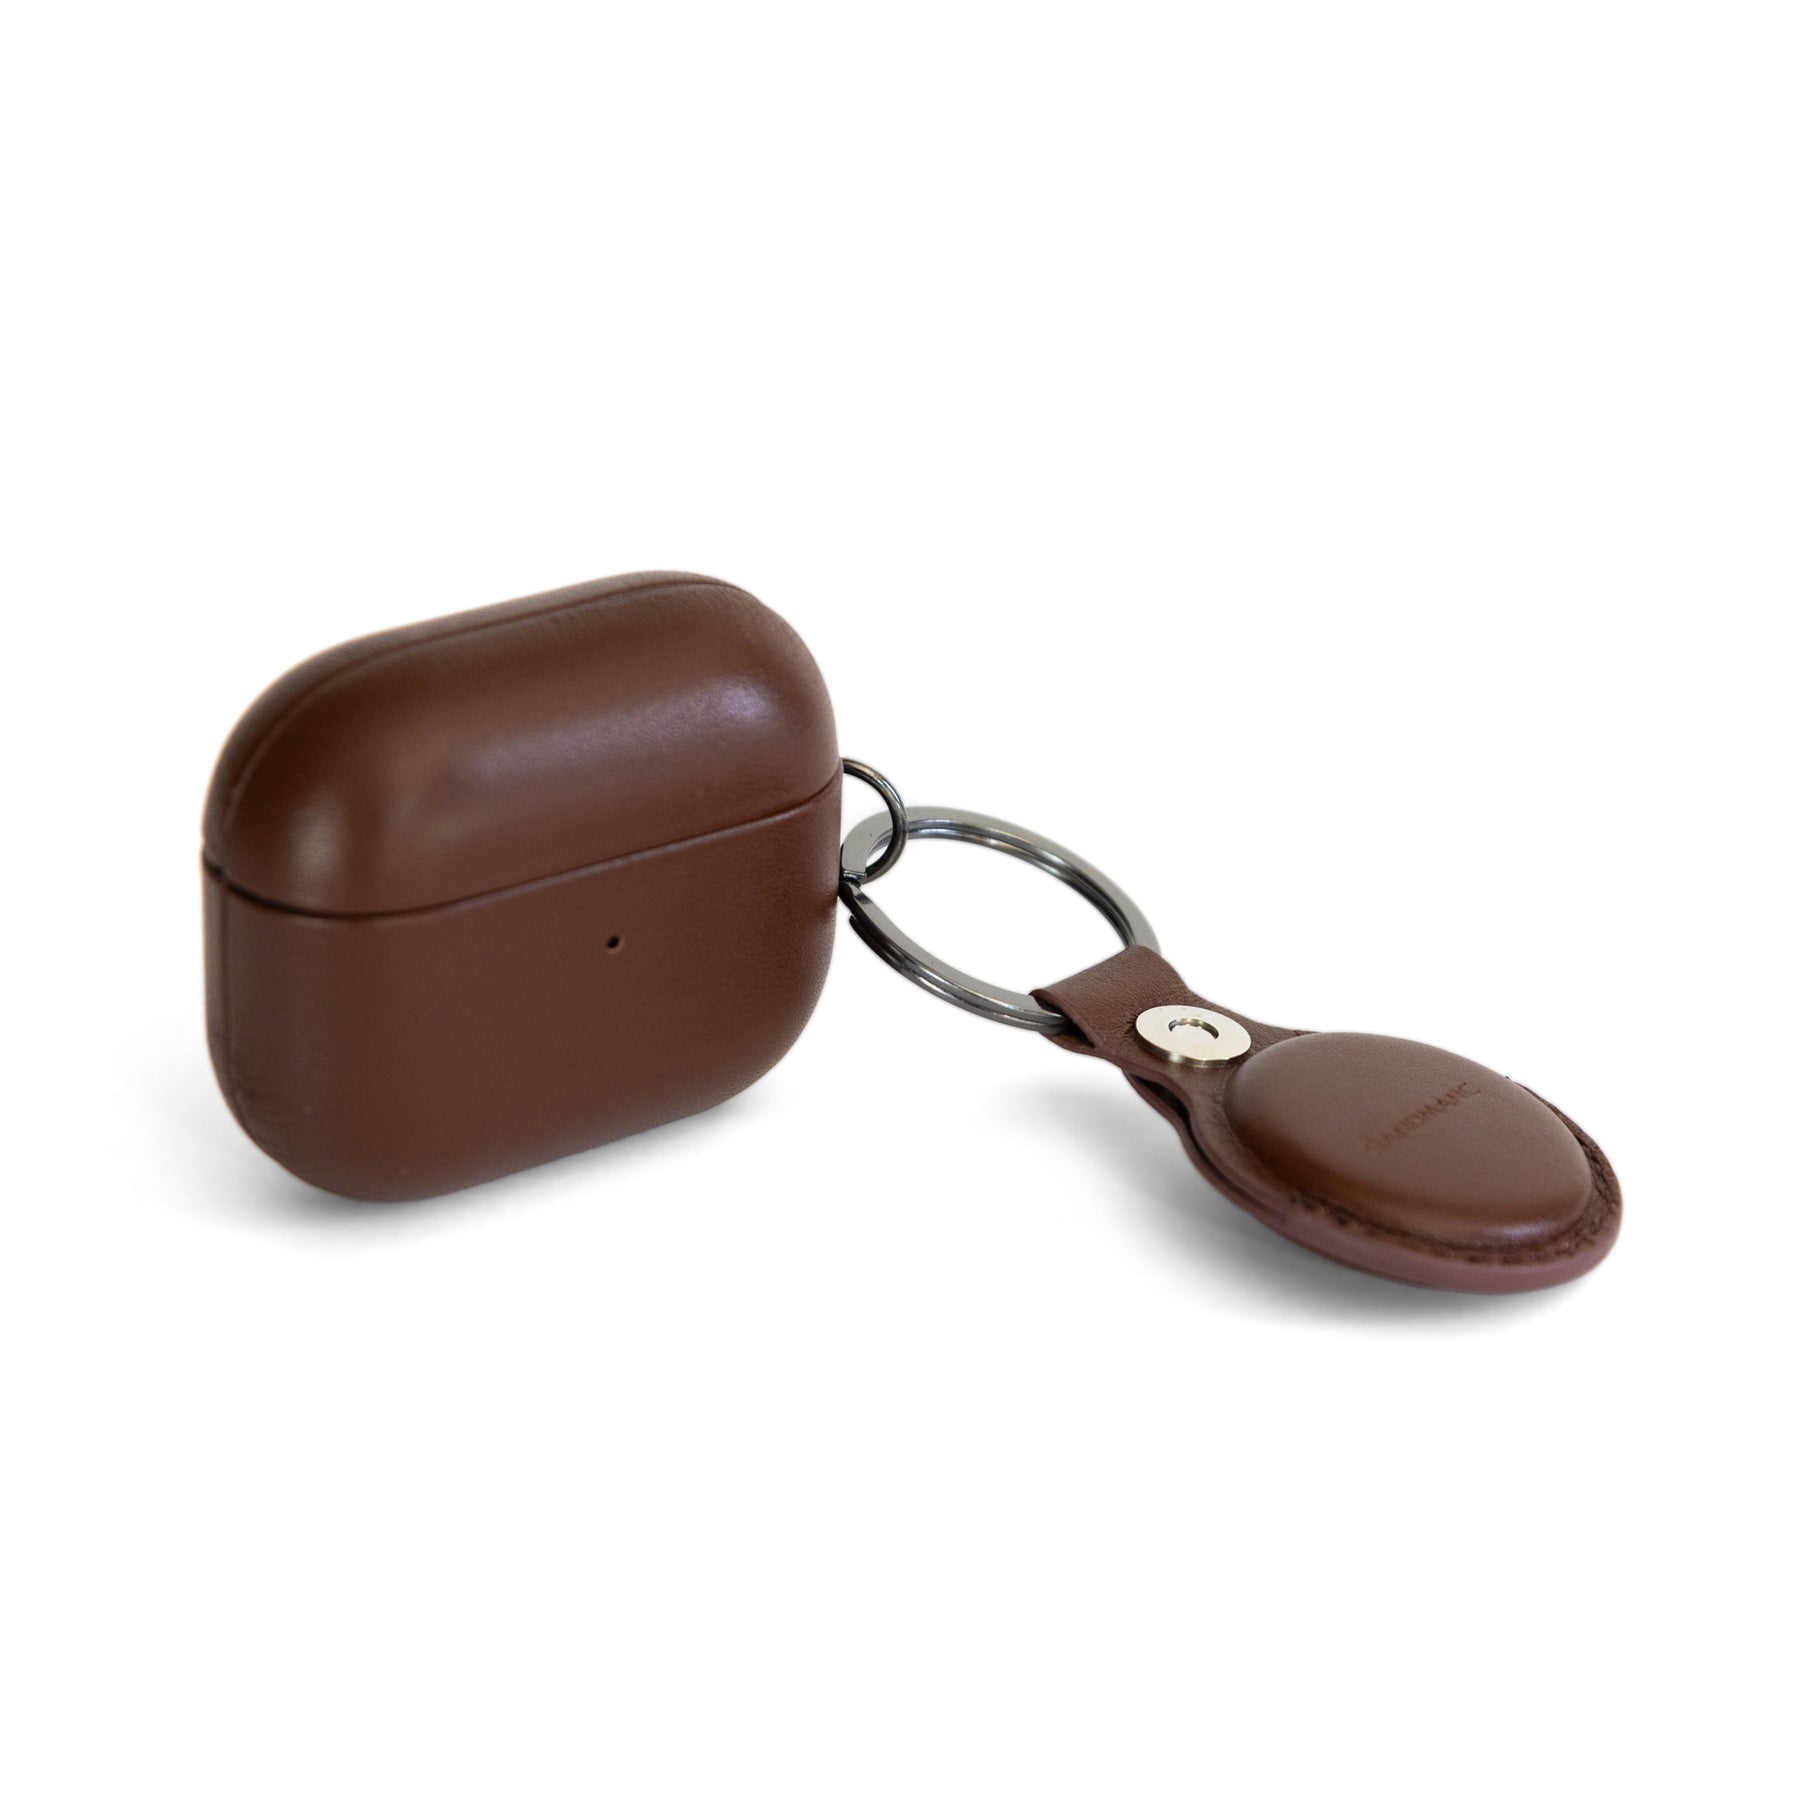 Leather Case for AirPods 1 & 2 [4 Colors]